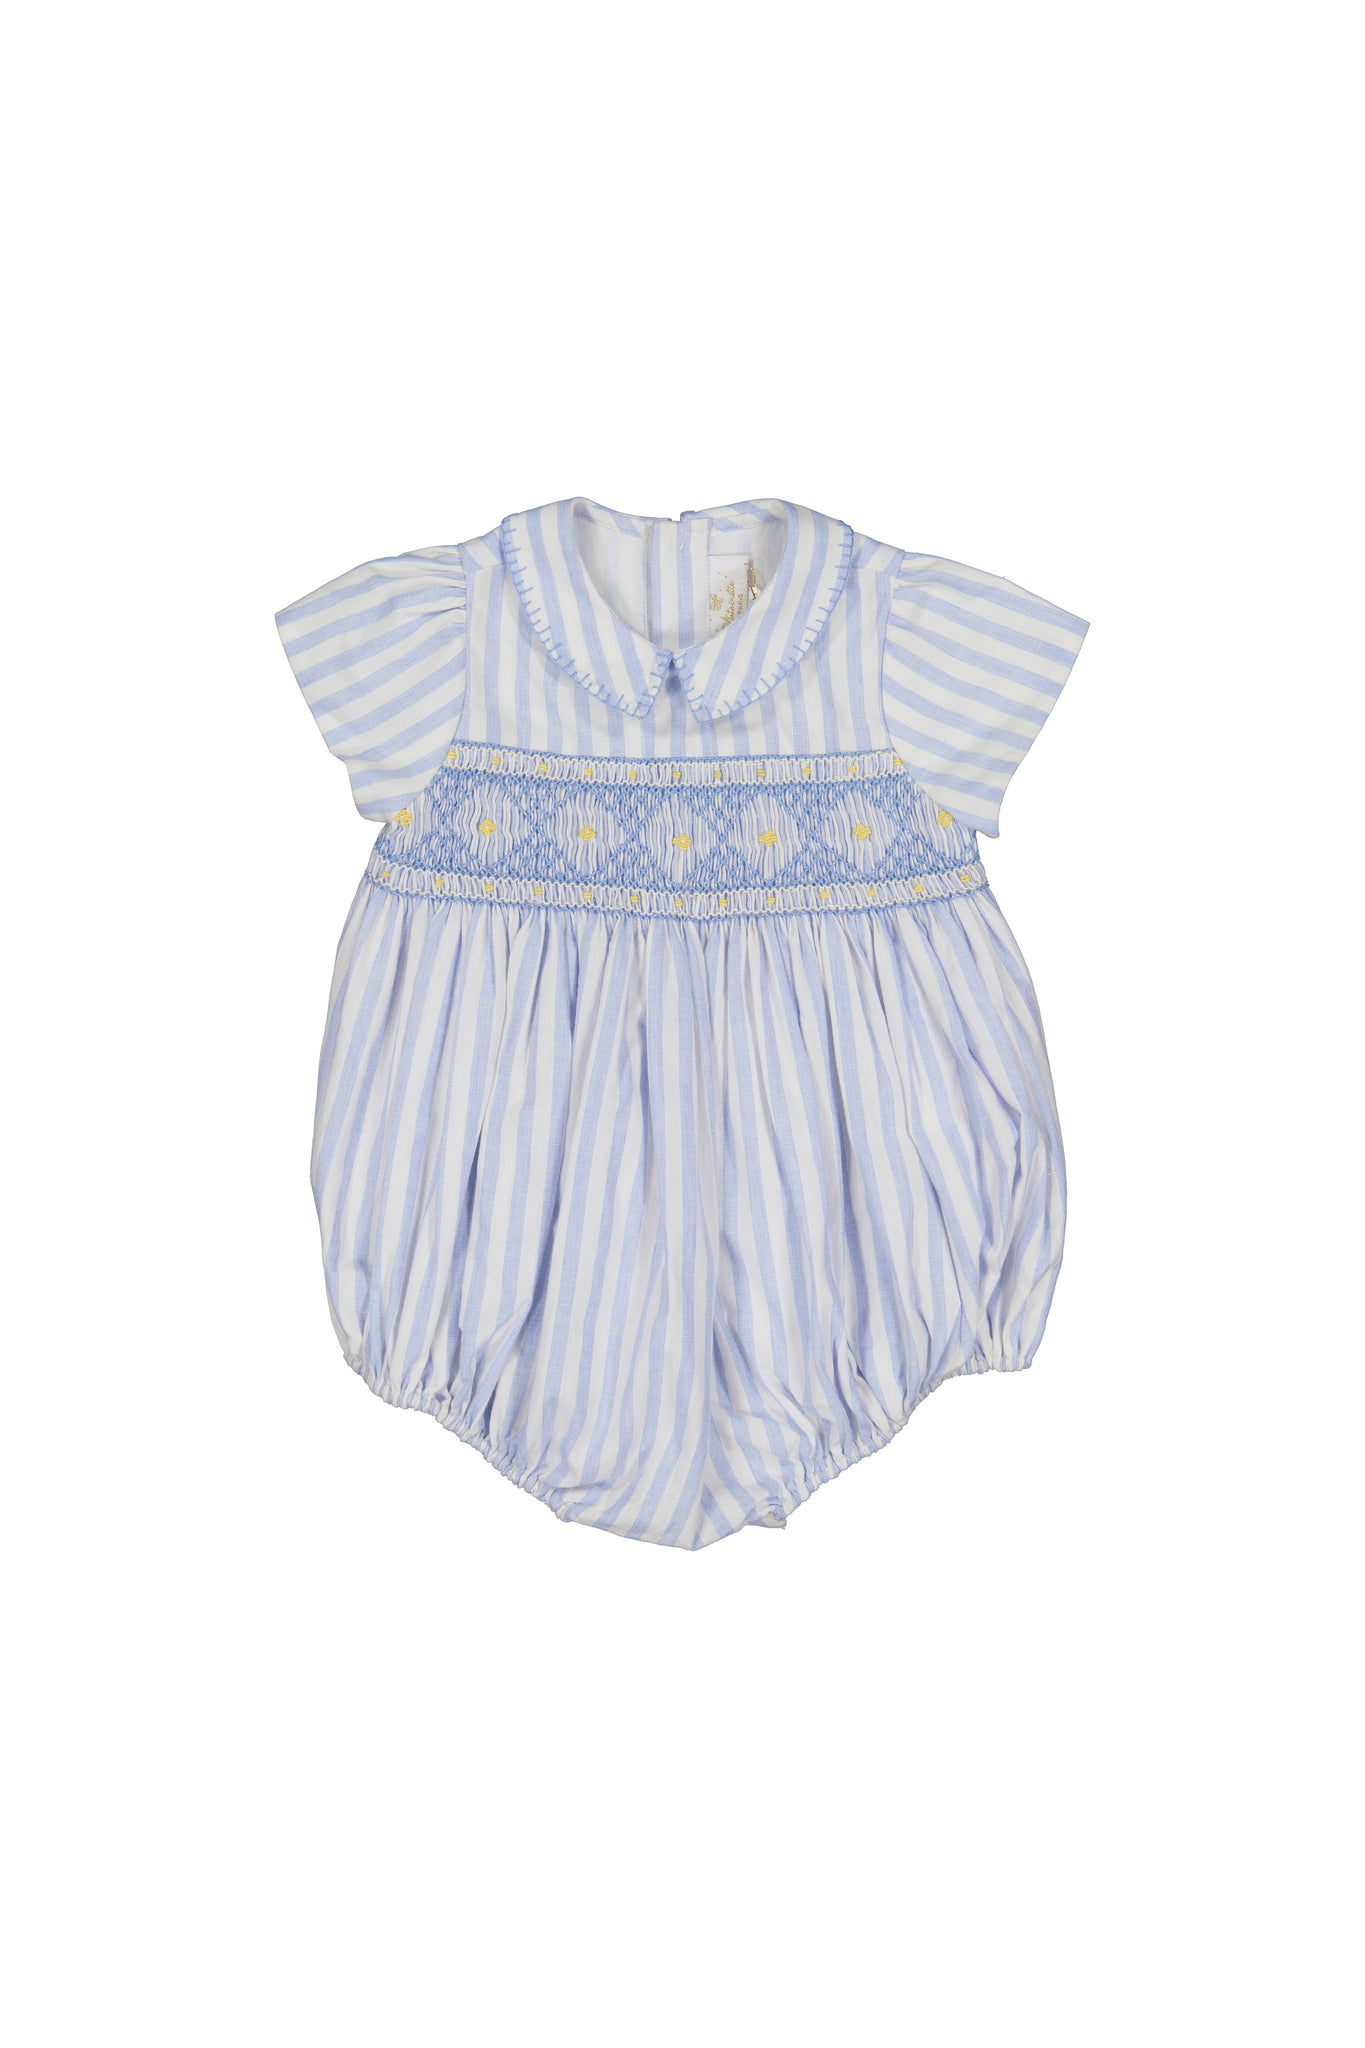 GEORGE BLUE STRIPES SMOCKED BABY BUBBLE